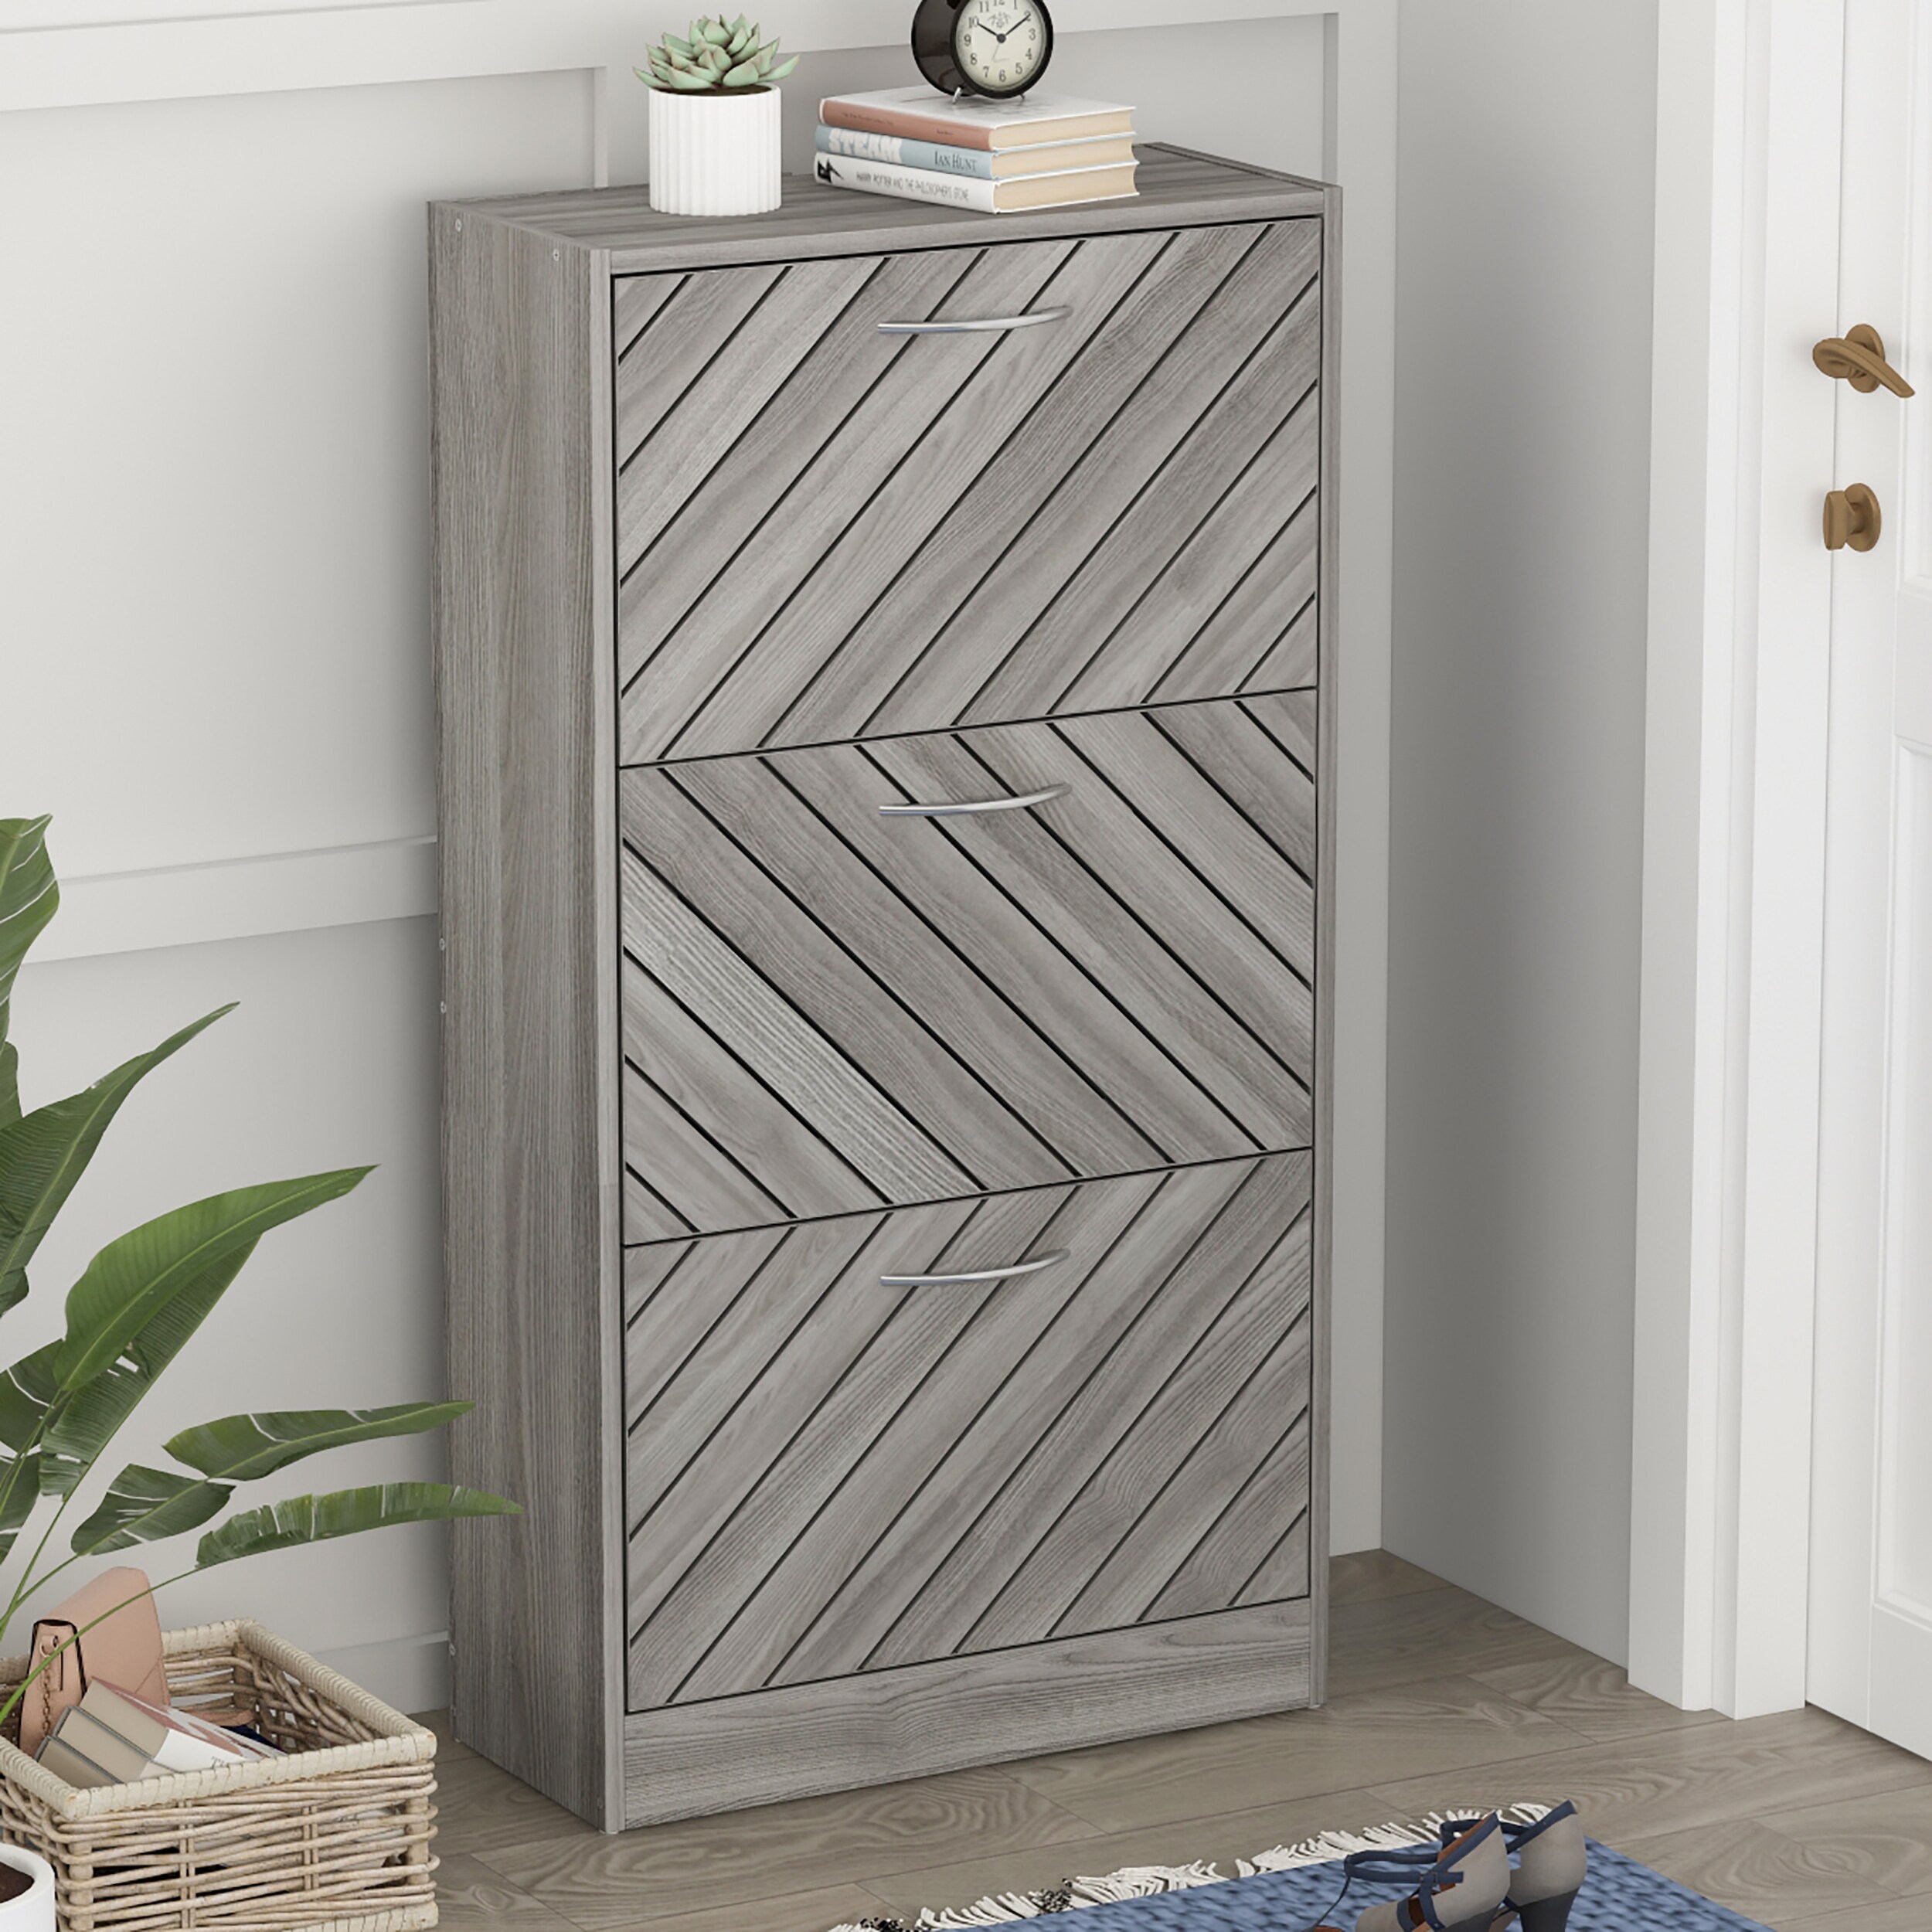 FUFU&GAGA 42.3 in. H x 22.4 in. W Gray Shoe Storage Cabinet with 3